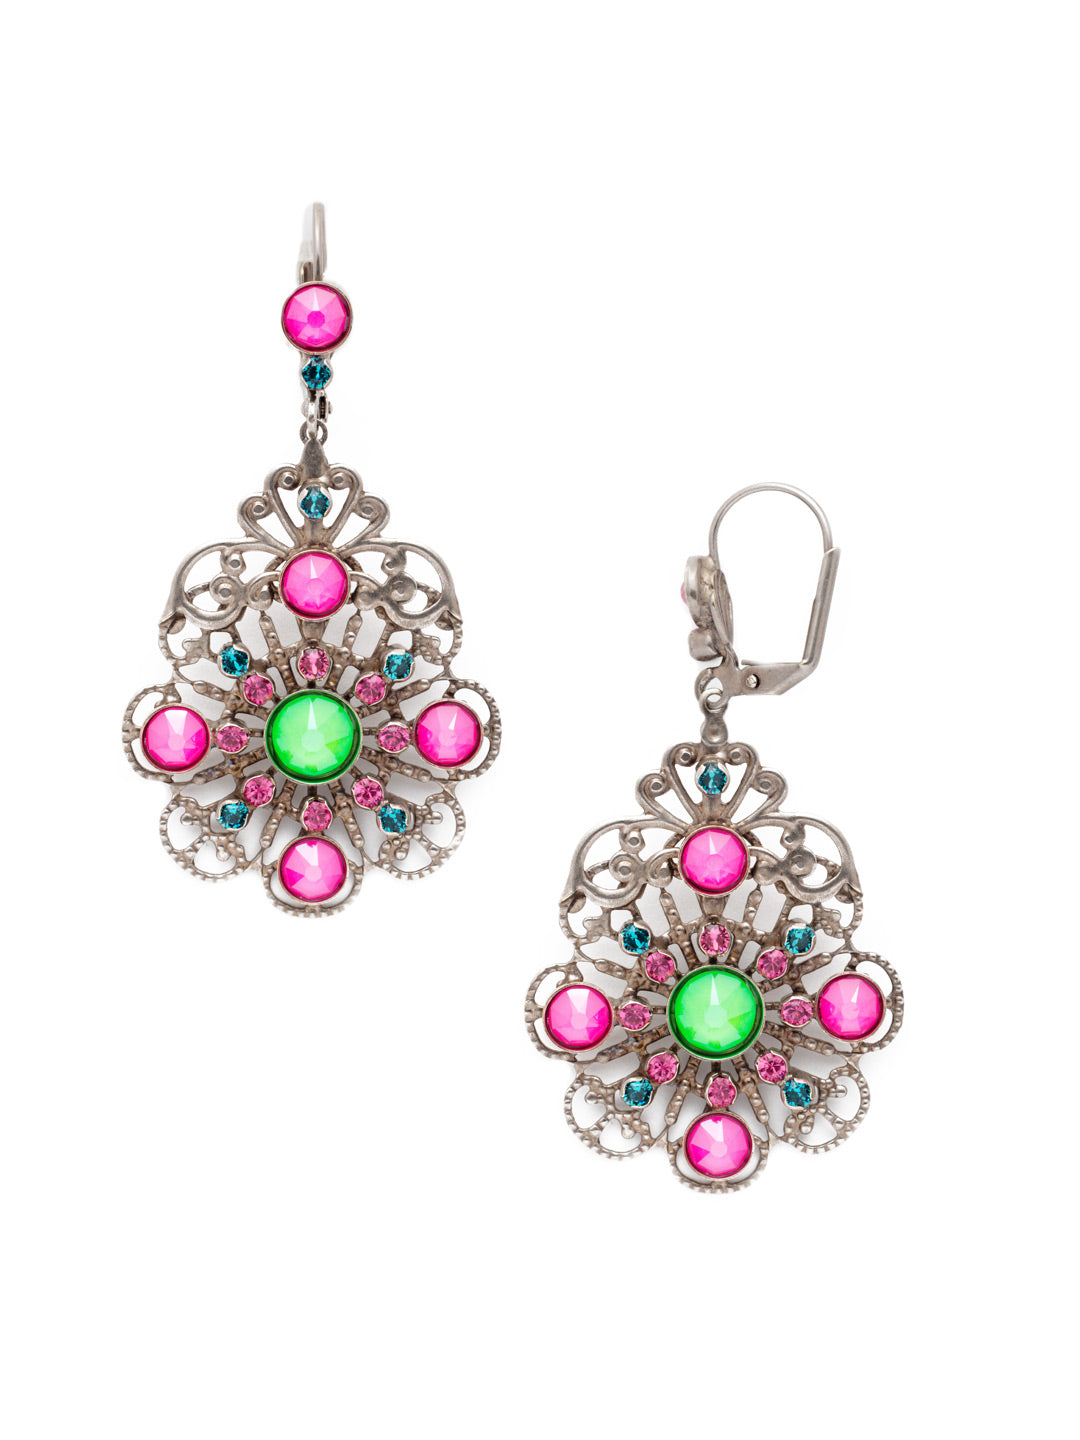 Royalty Statement Earring - ECP23ASWDW - <p>The Royalty Statement Earrings will do just that, make you feel like royalty! Ornate designs and assorted crystals blend beautifully on the end of a French wire with a clasp back. From Sorrelli's Wild Watermelon collection in our Antique Silver-tone finish.</p>